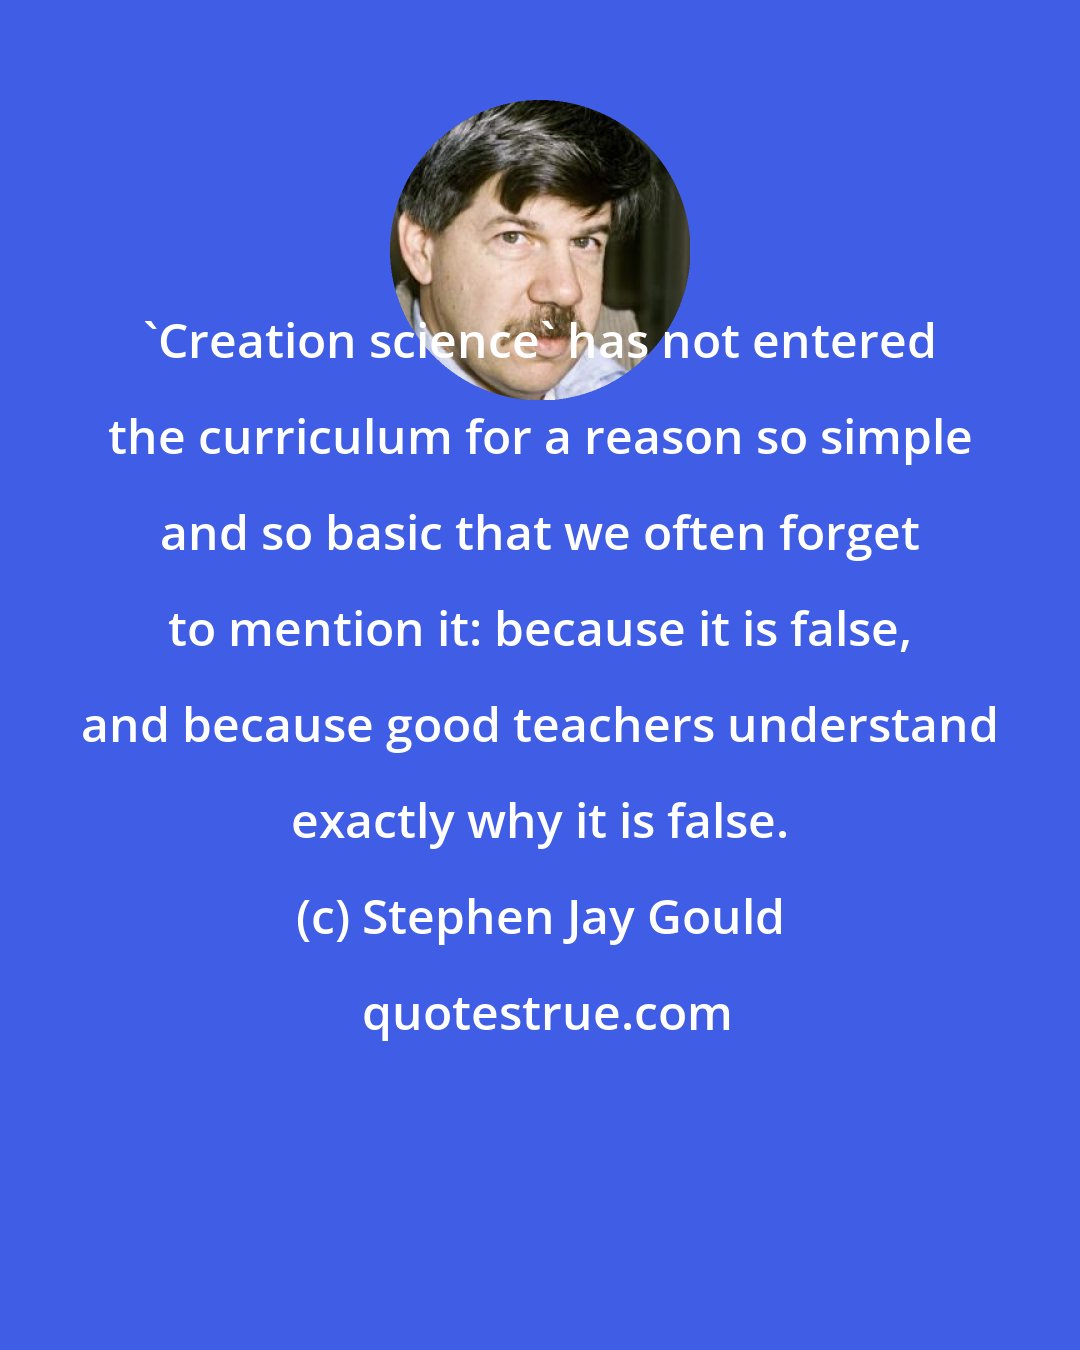 Stephen Jay Gould: 'Creation science' has not entered the curriculum for a reason so simple and so basic that we often forget to mention it: because it is false, and because good teachers understand exactly why it is false.